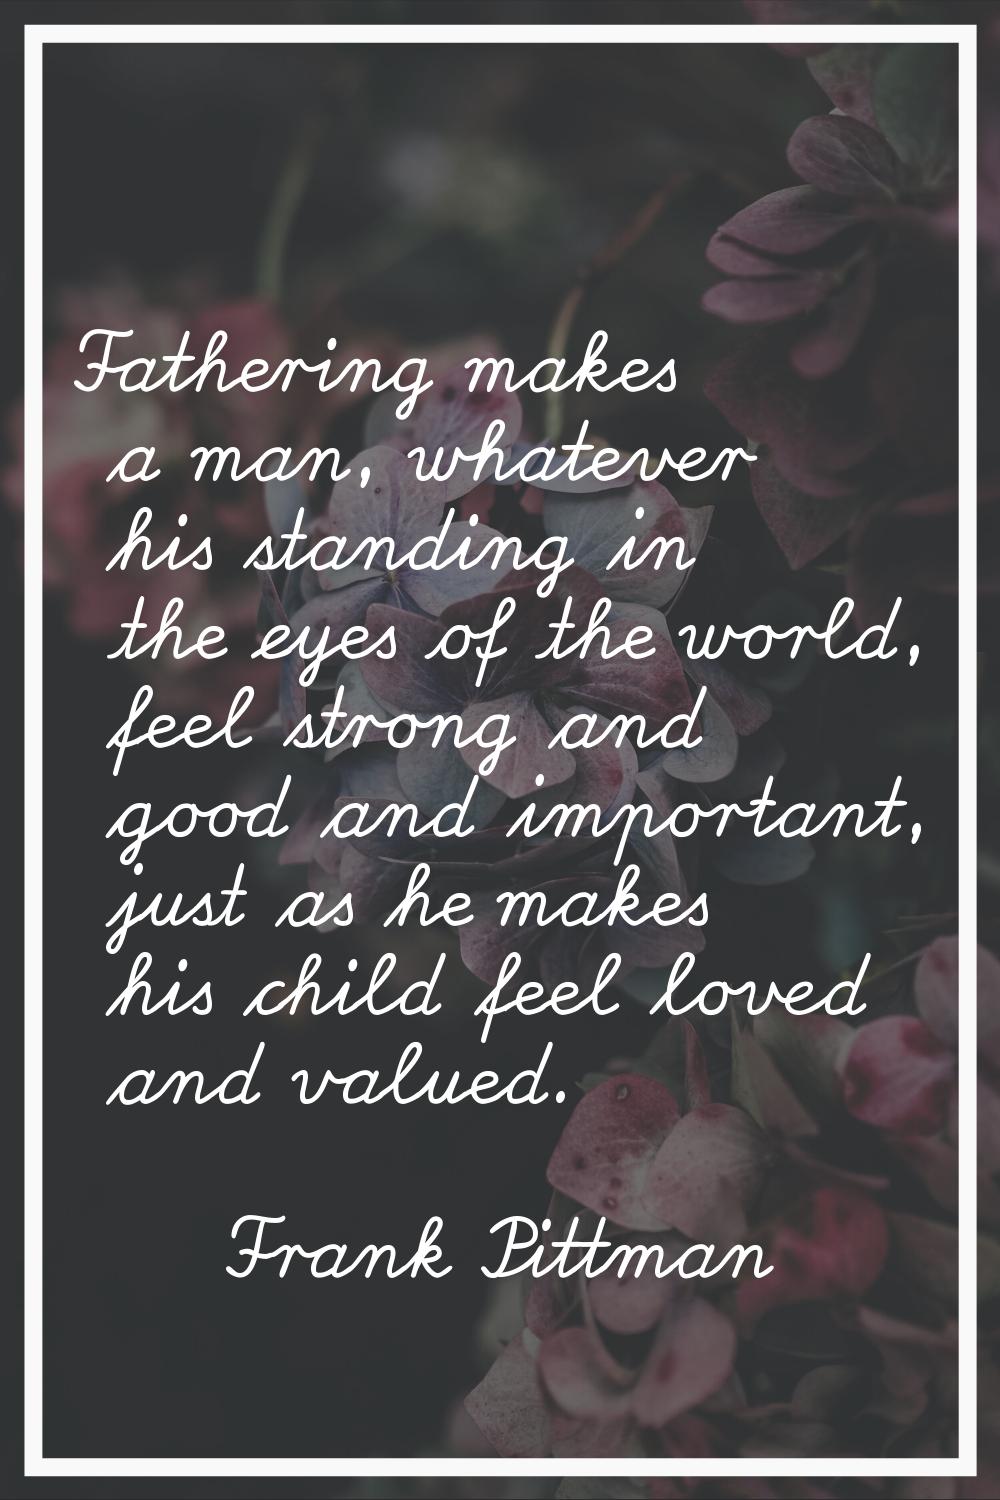 Fathering makes a man, whatever his standing in the eyes of the world, feel strong and good and imp